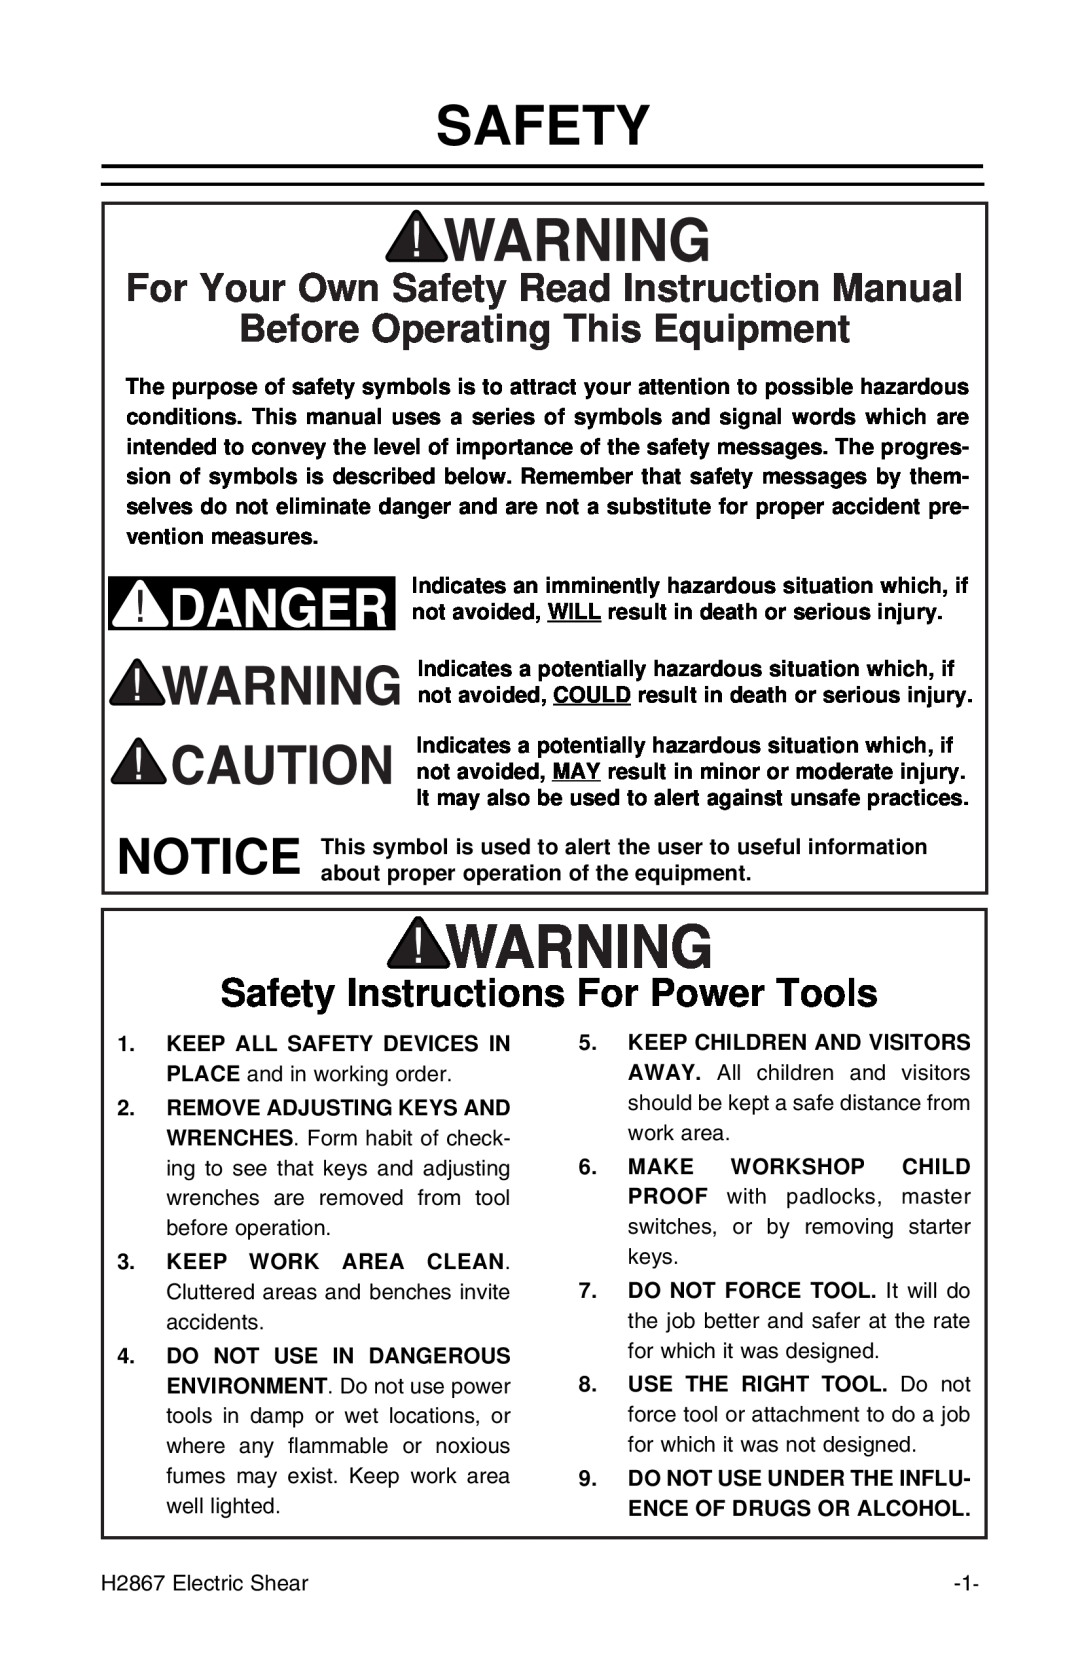 Grizzly H2867 instruction manual Before Operating This Equipment, Safety Instructions For Power Tools 